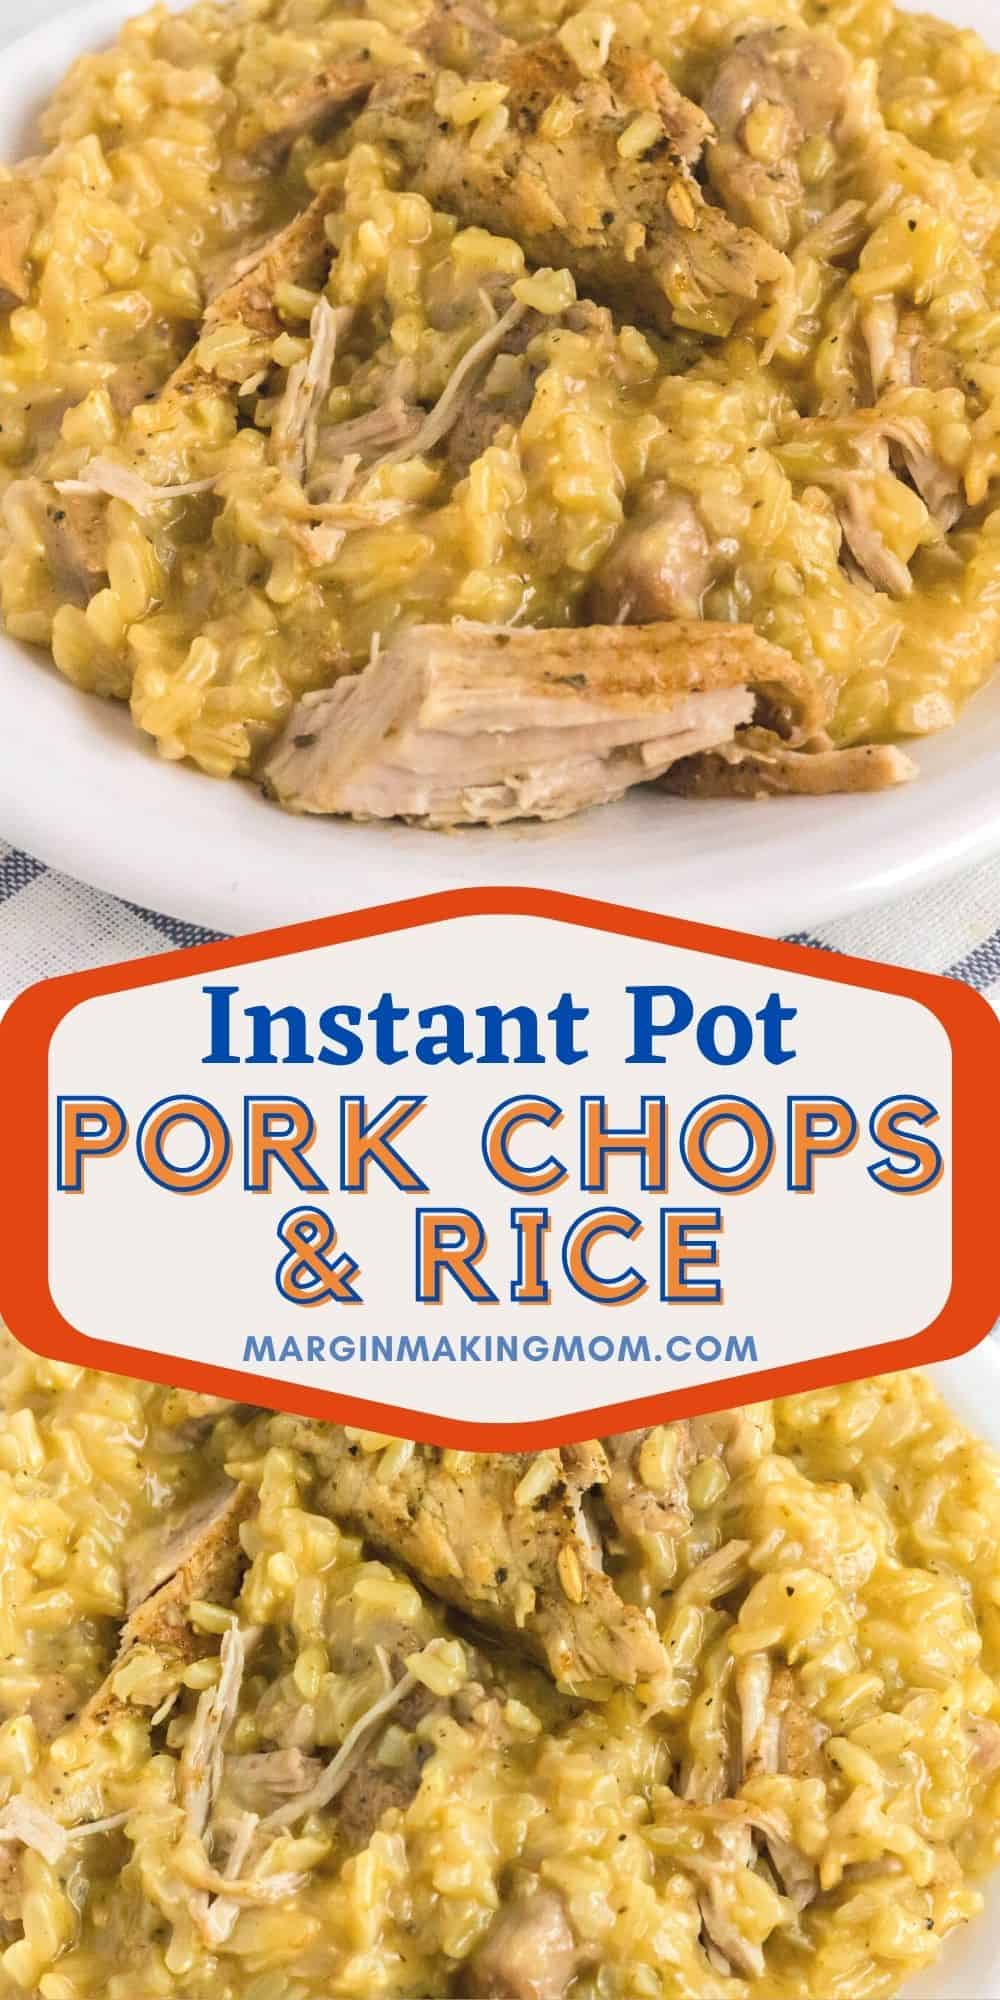 collage image with two photos of Instant Pot pork chops and rice. One shows the food on a white plate, while the other is a close-up view of the food.